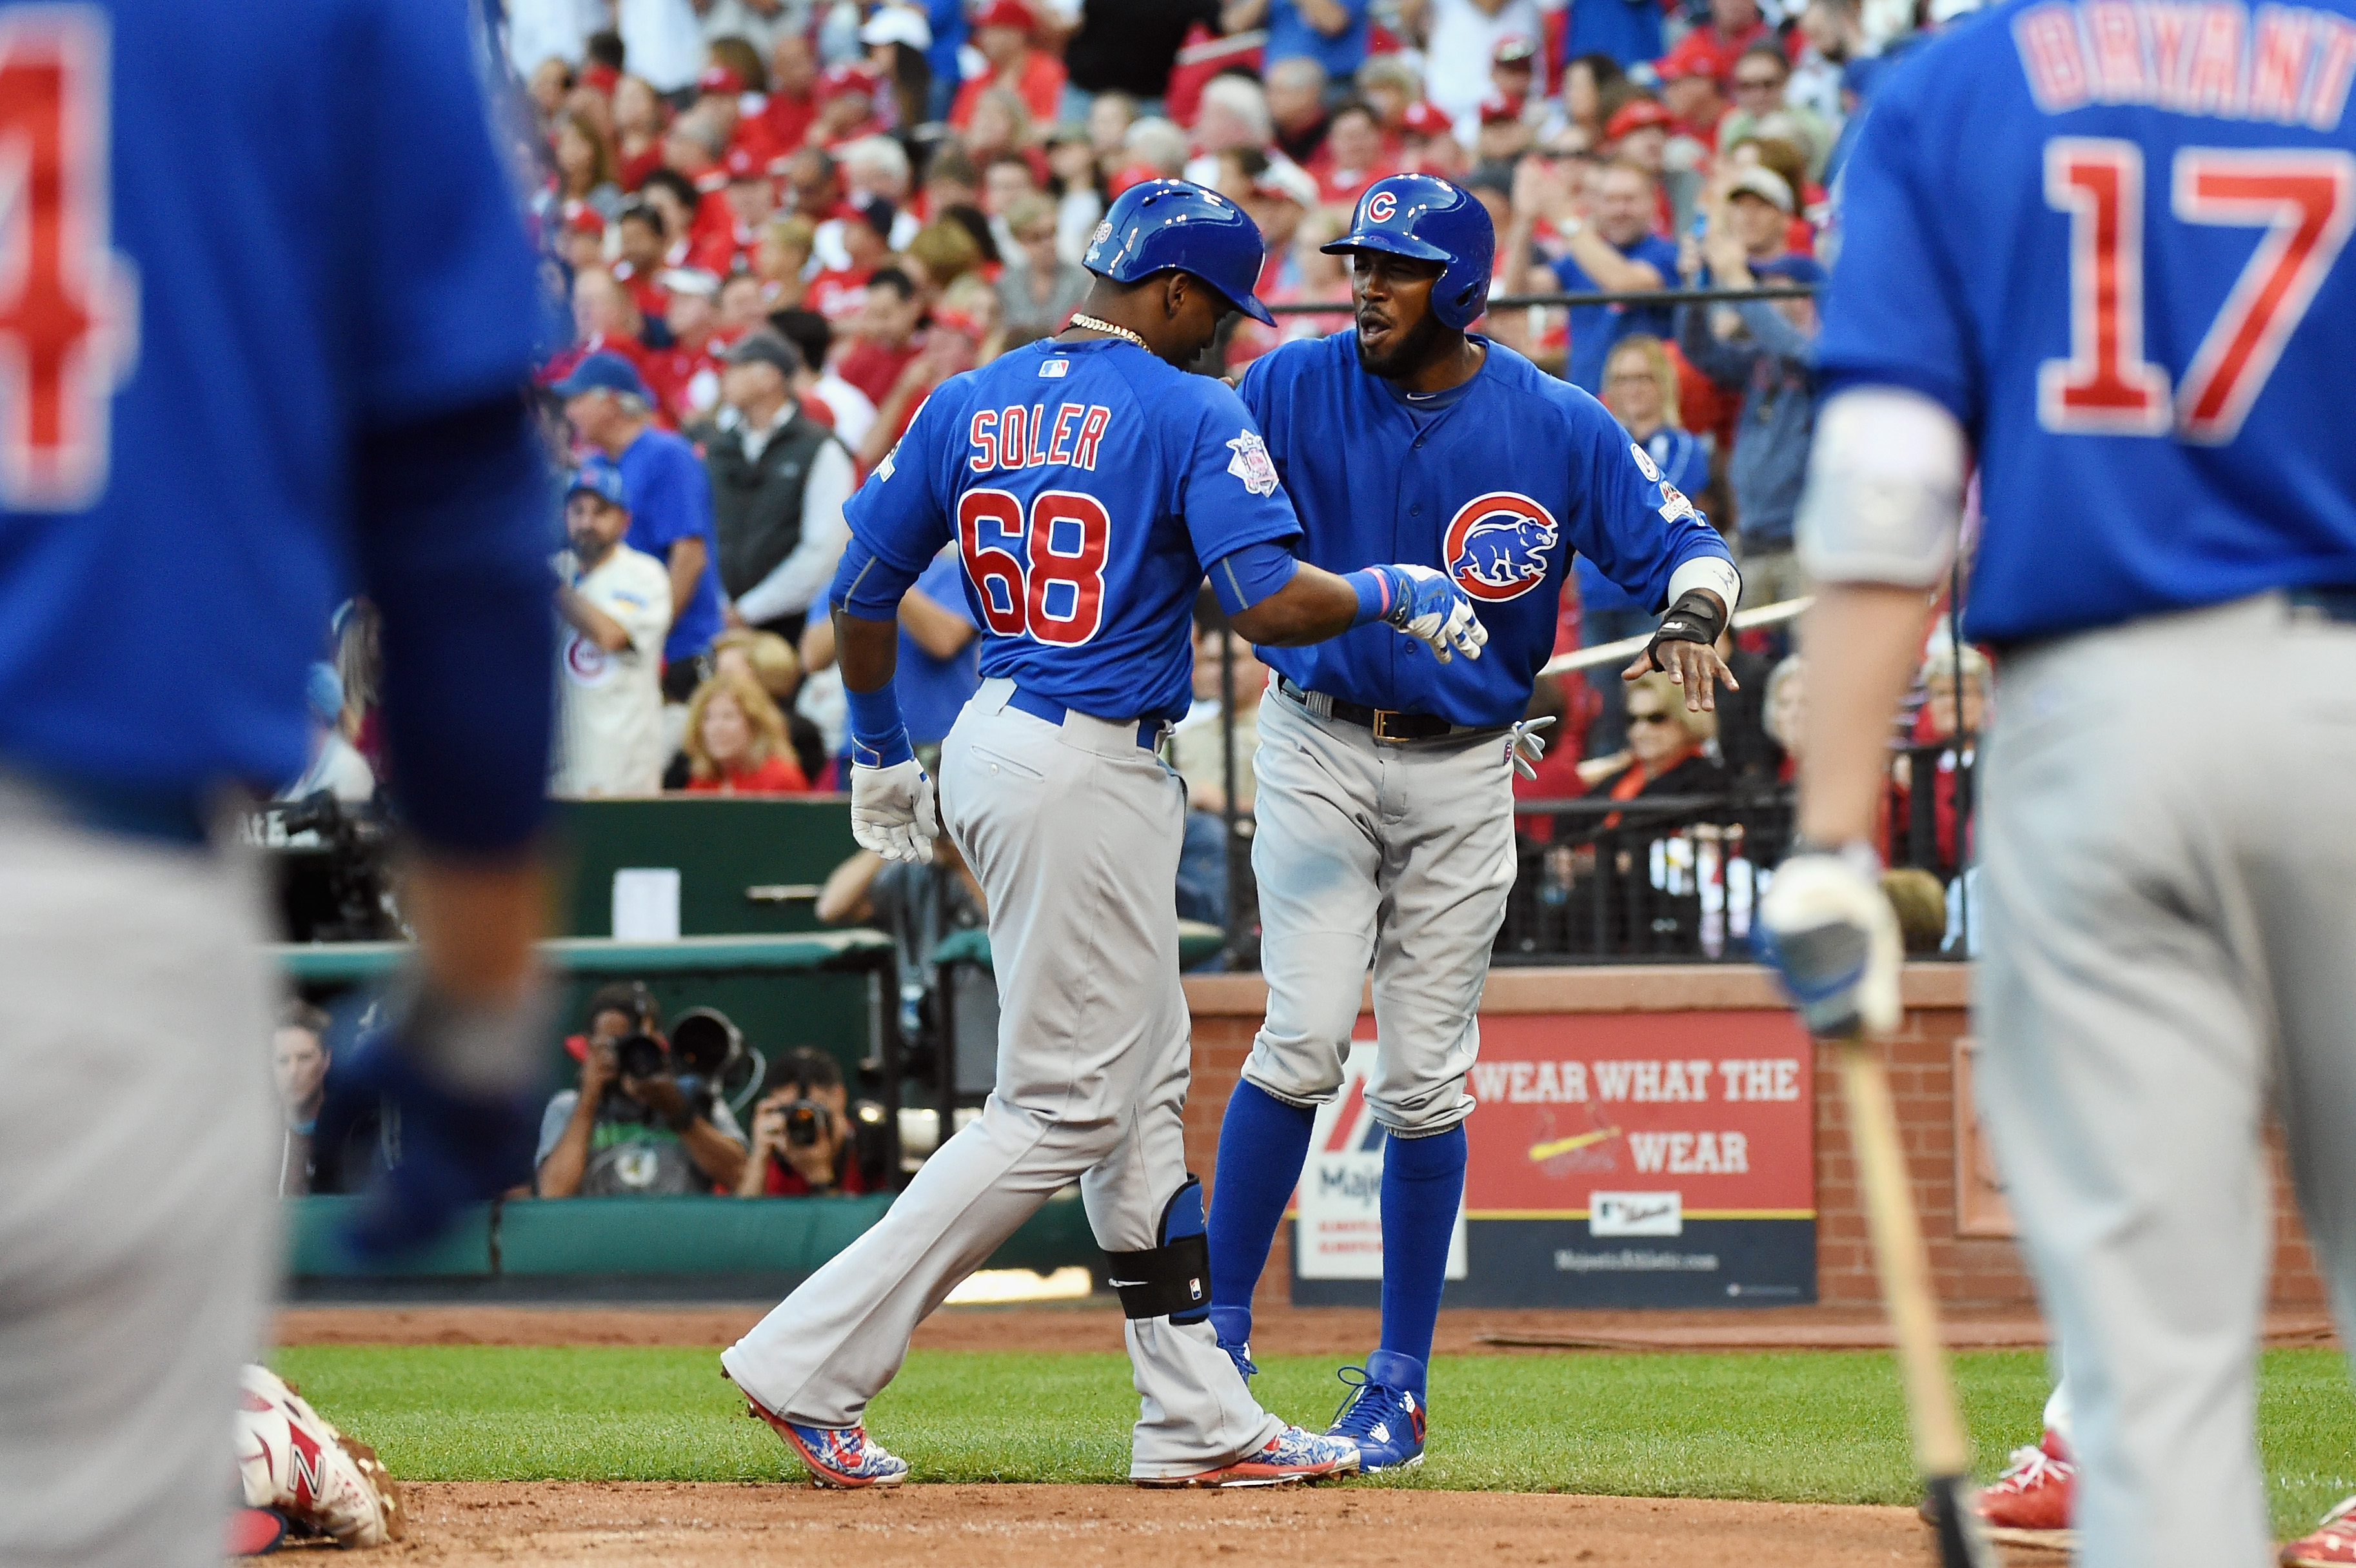 How to Watch Cardinals vs. Cubs NLDS Game 4 Live Stream Online for Free